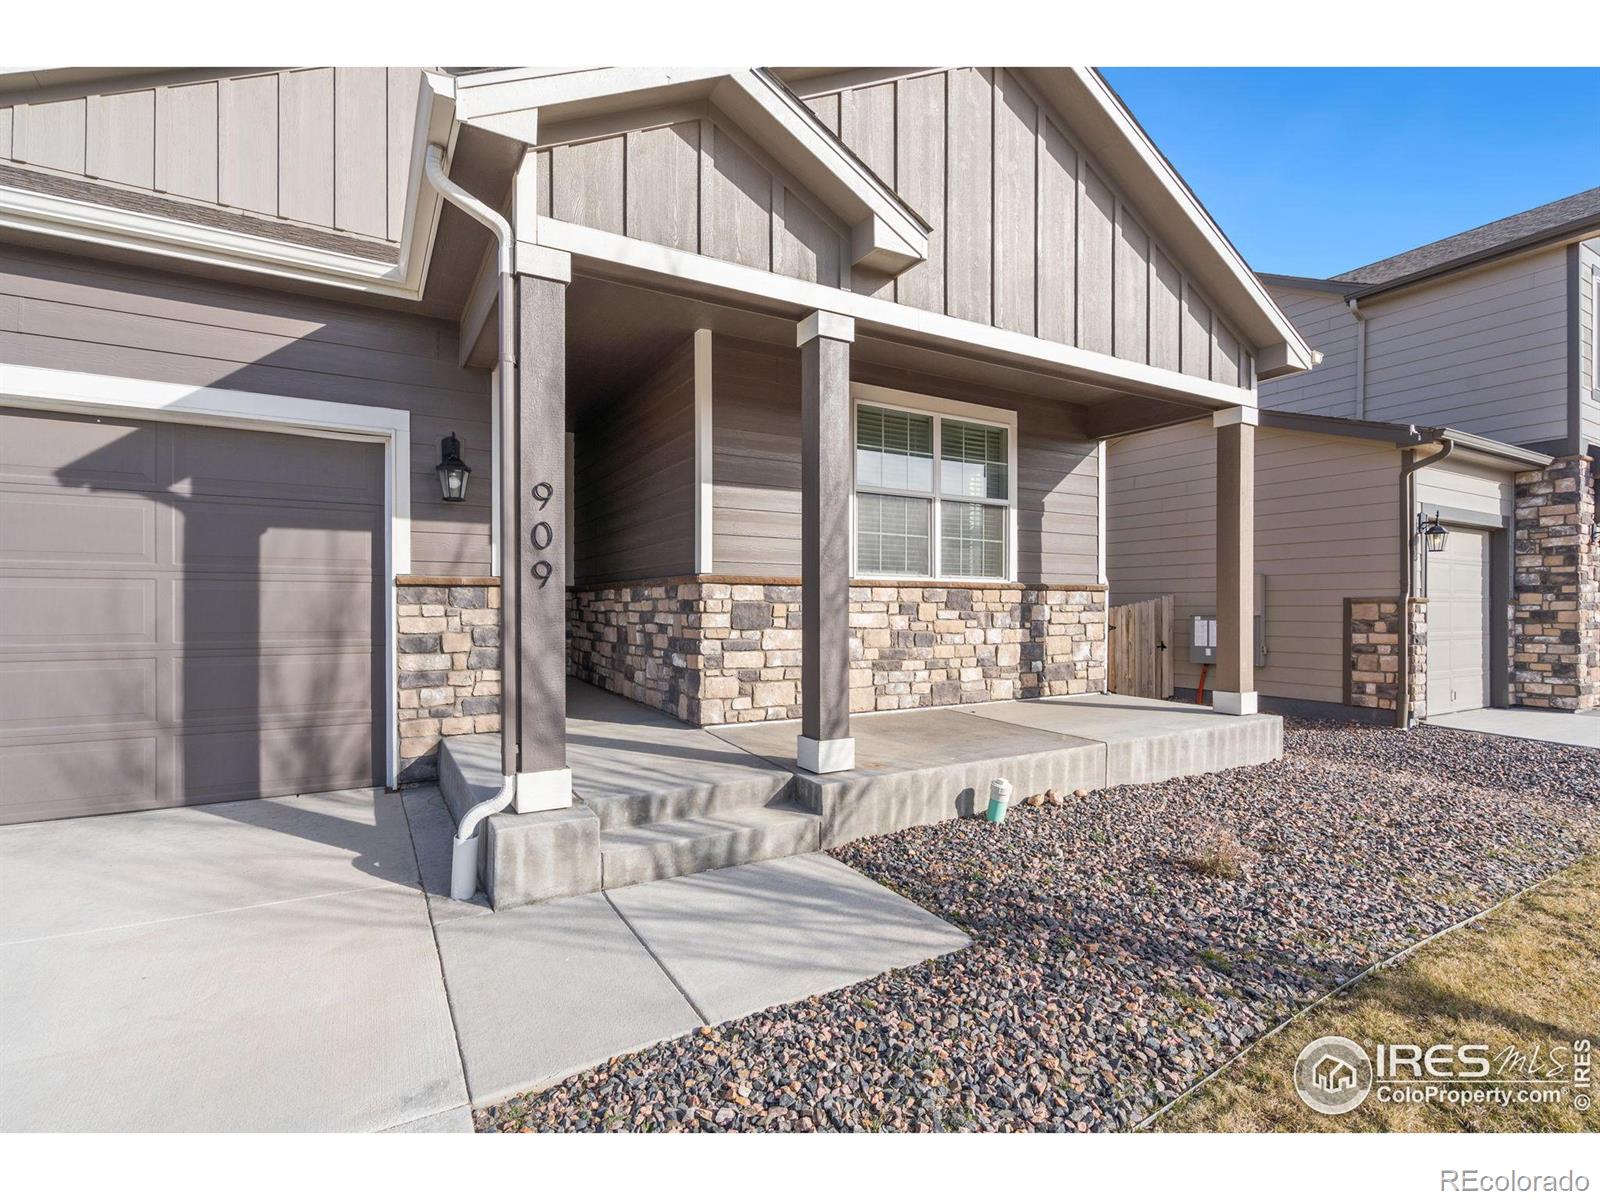 Report Image for 909  Camberly Drive,Windsor, Colorado